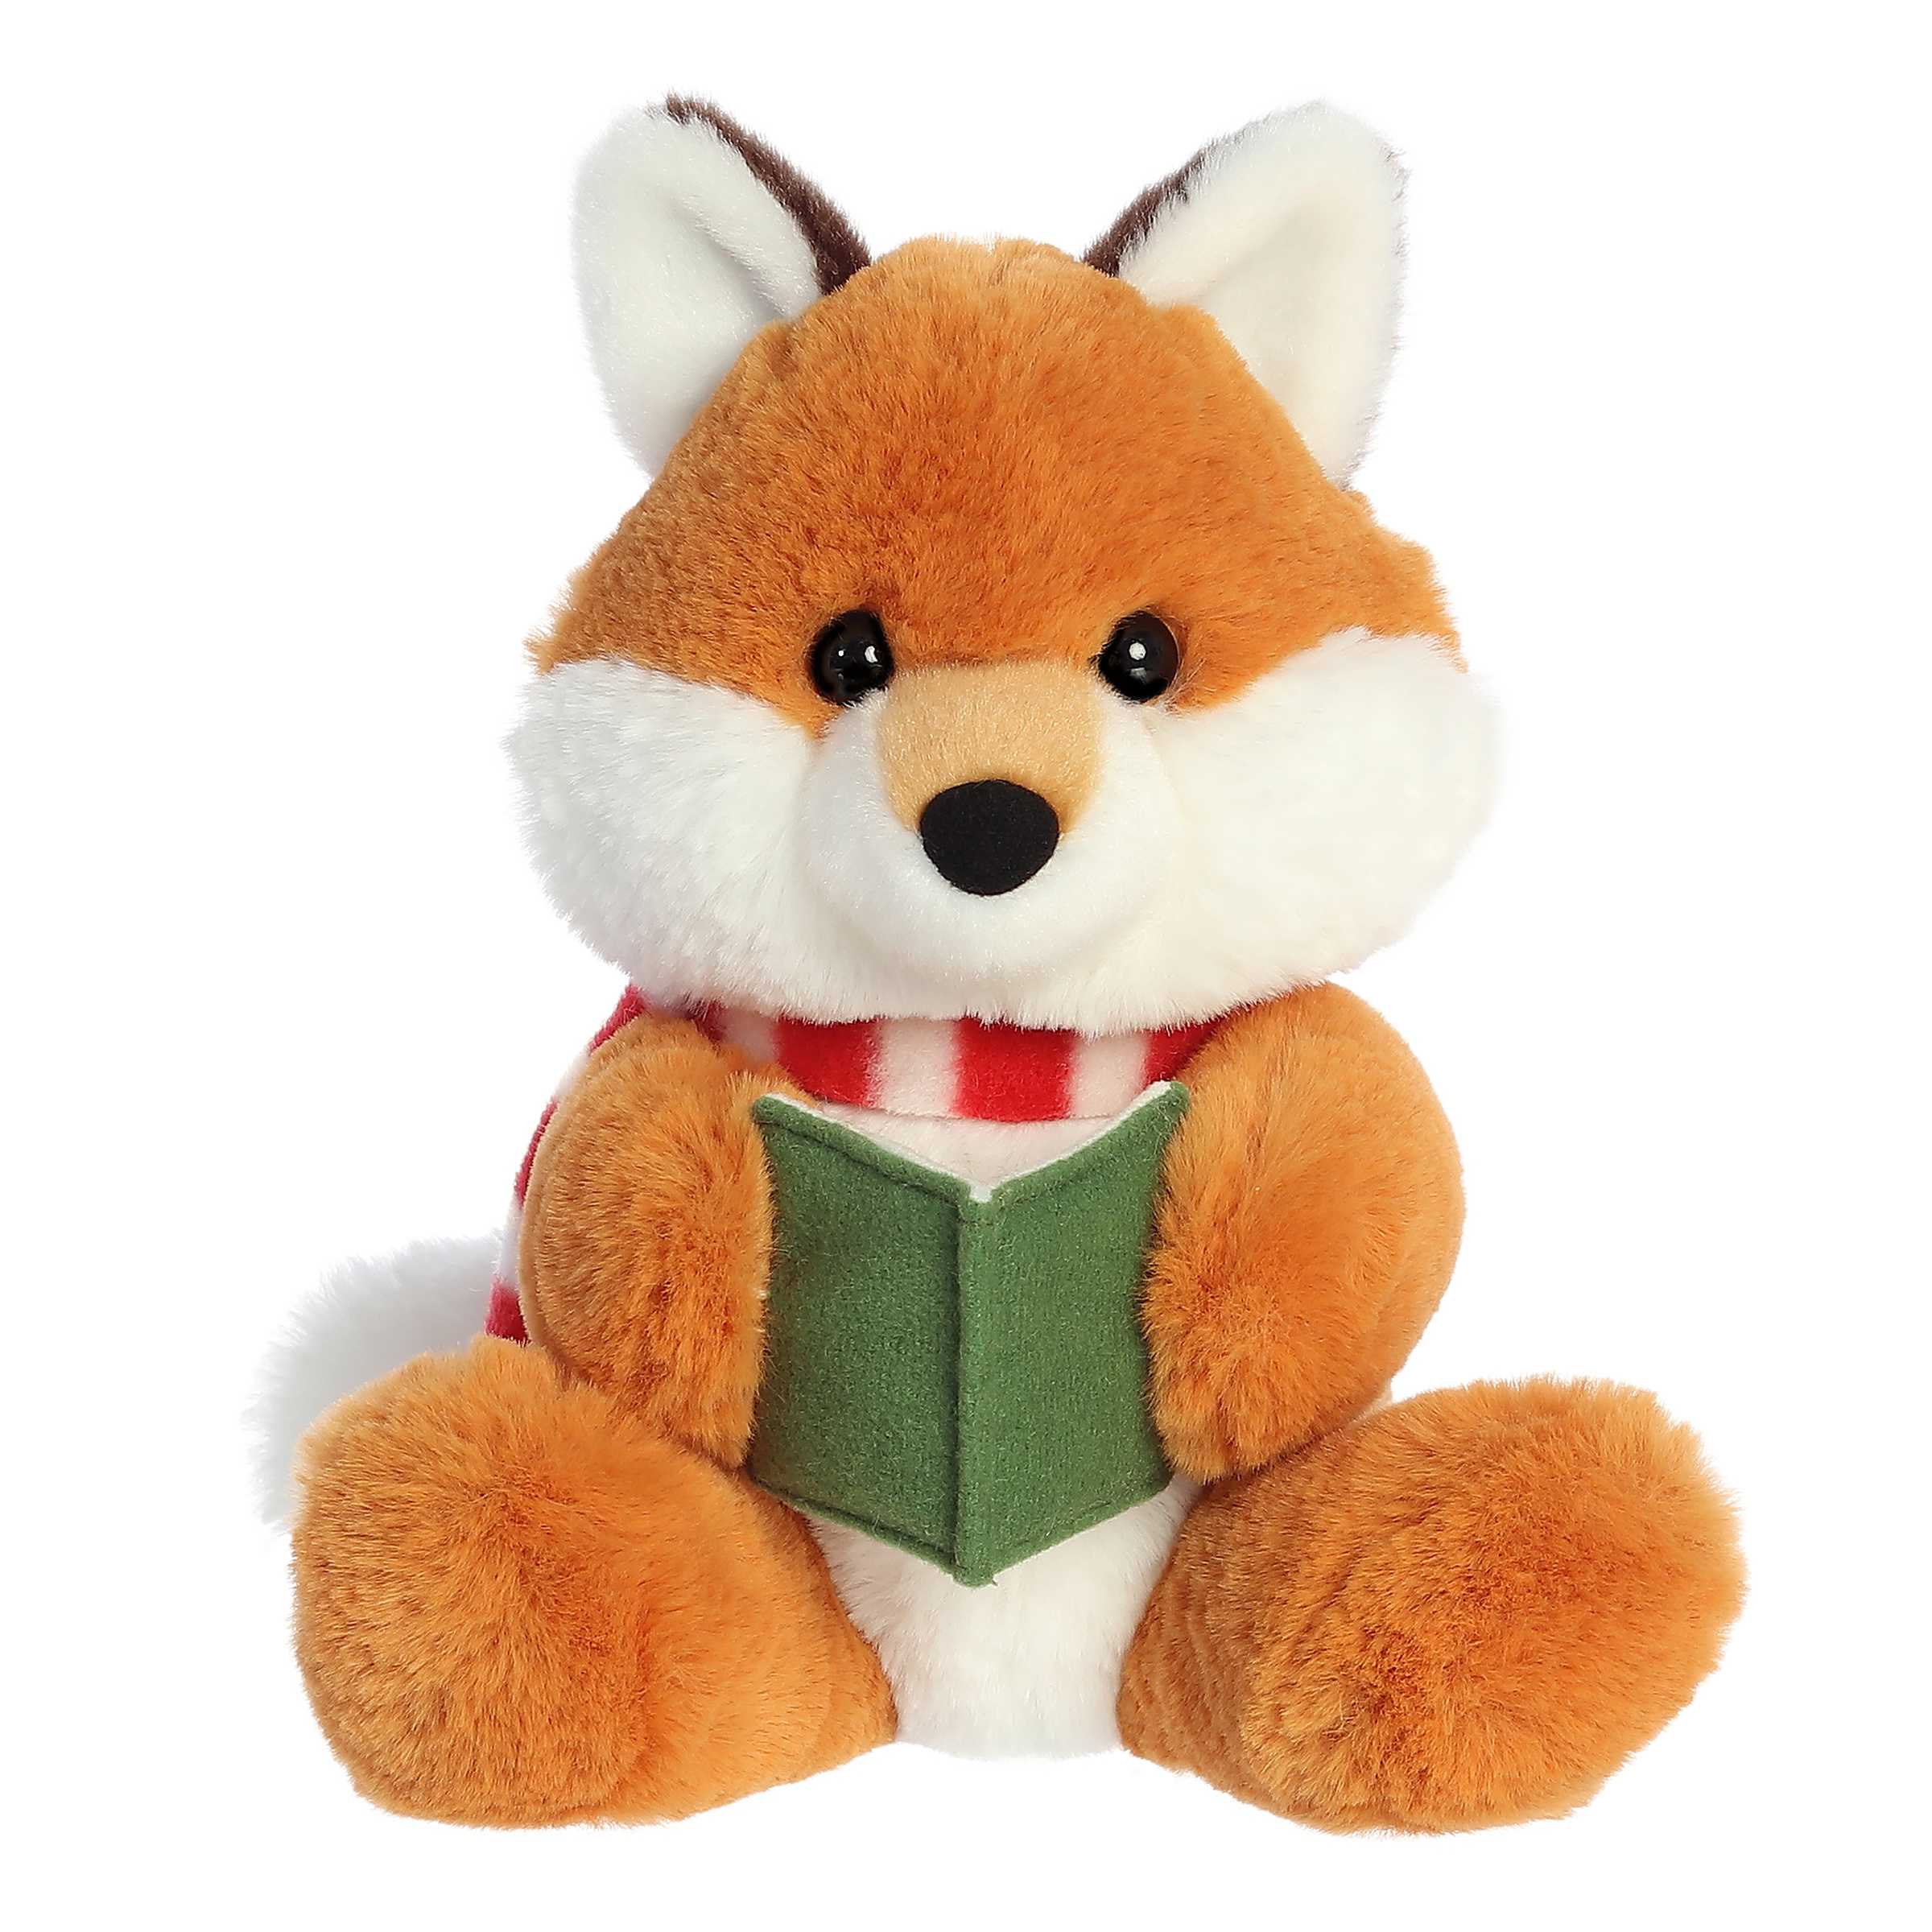 Adorable orange fox stuffed animal wearing a cozy red and white striped scarf and holding an open green songbook